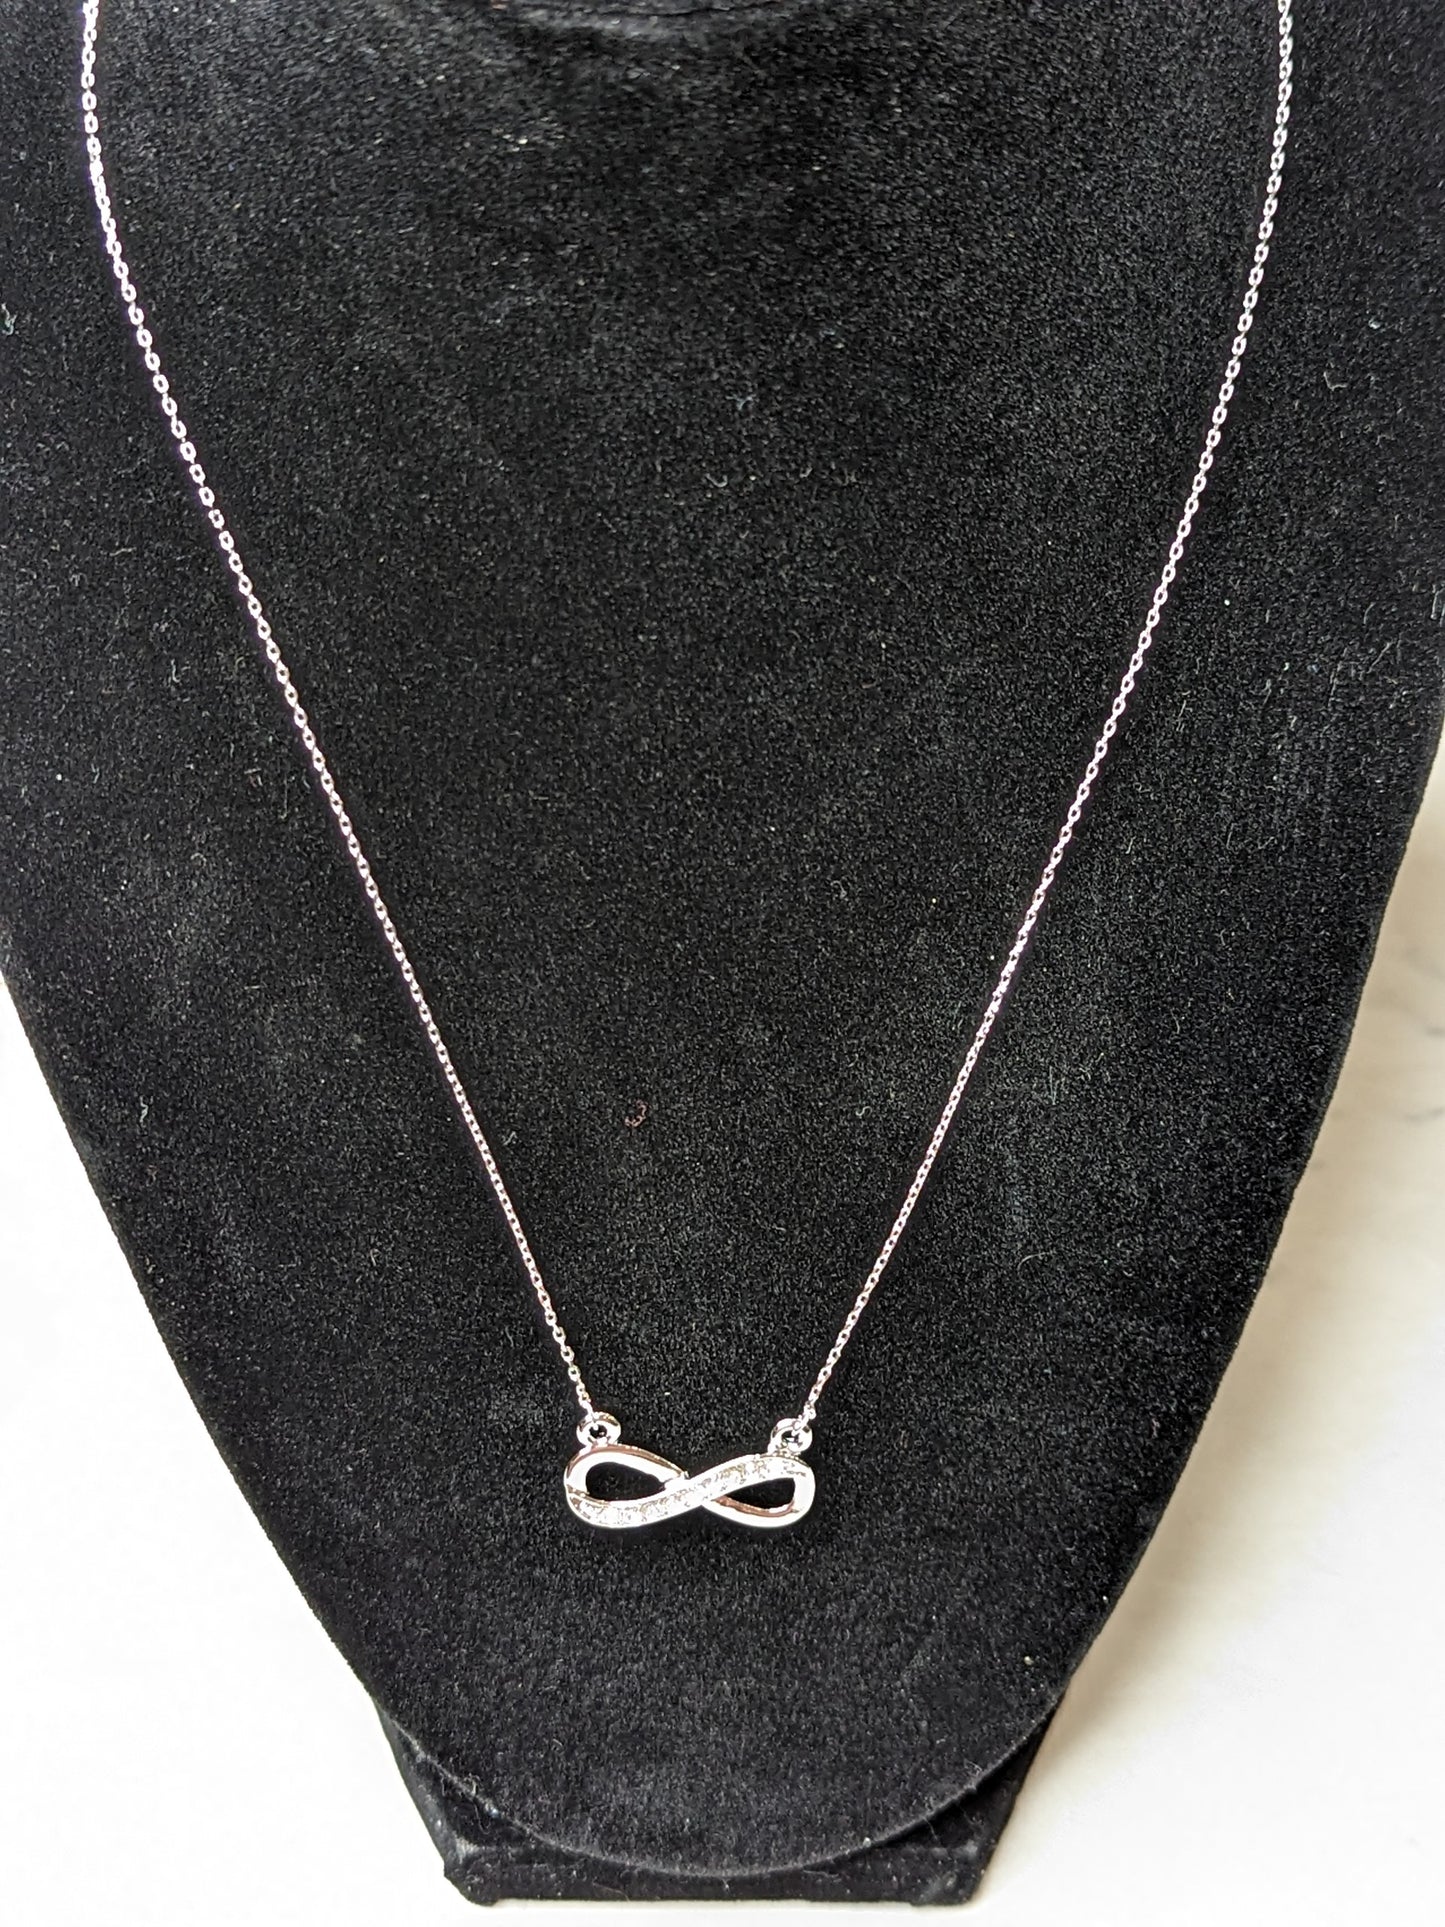 Infinity Symbol Necklace White Gold Plated Pendant with Crystals